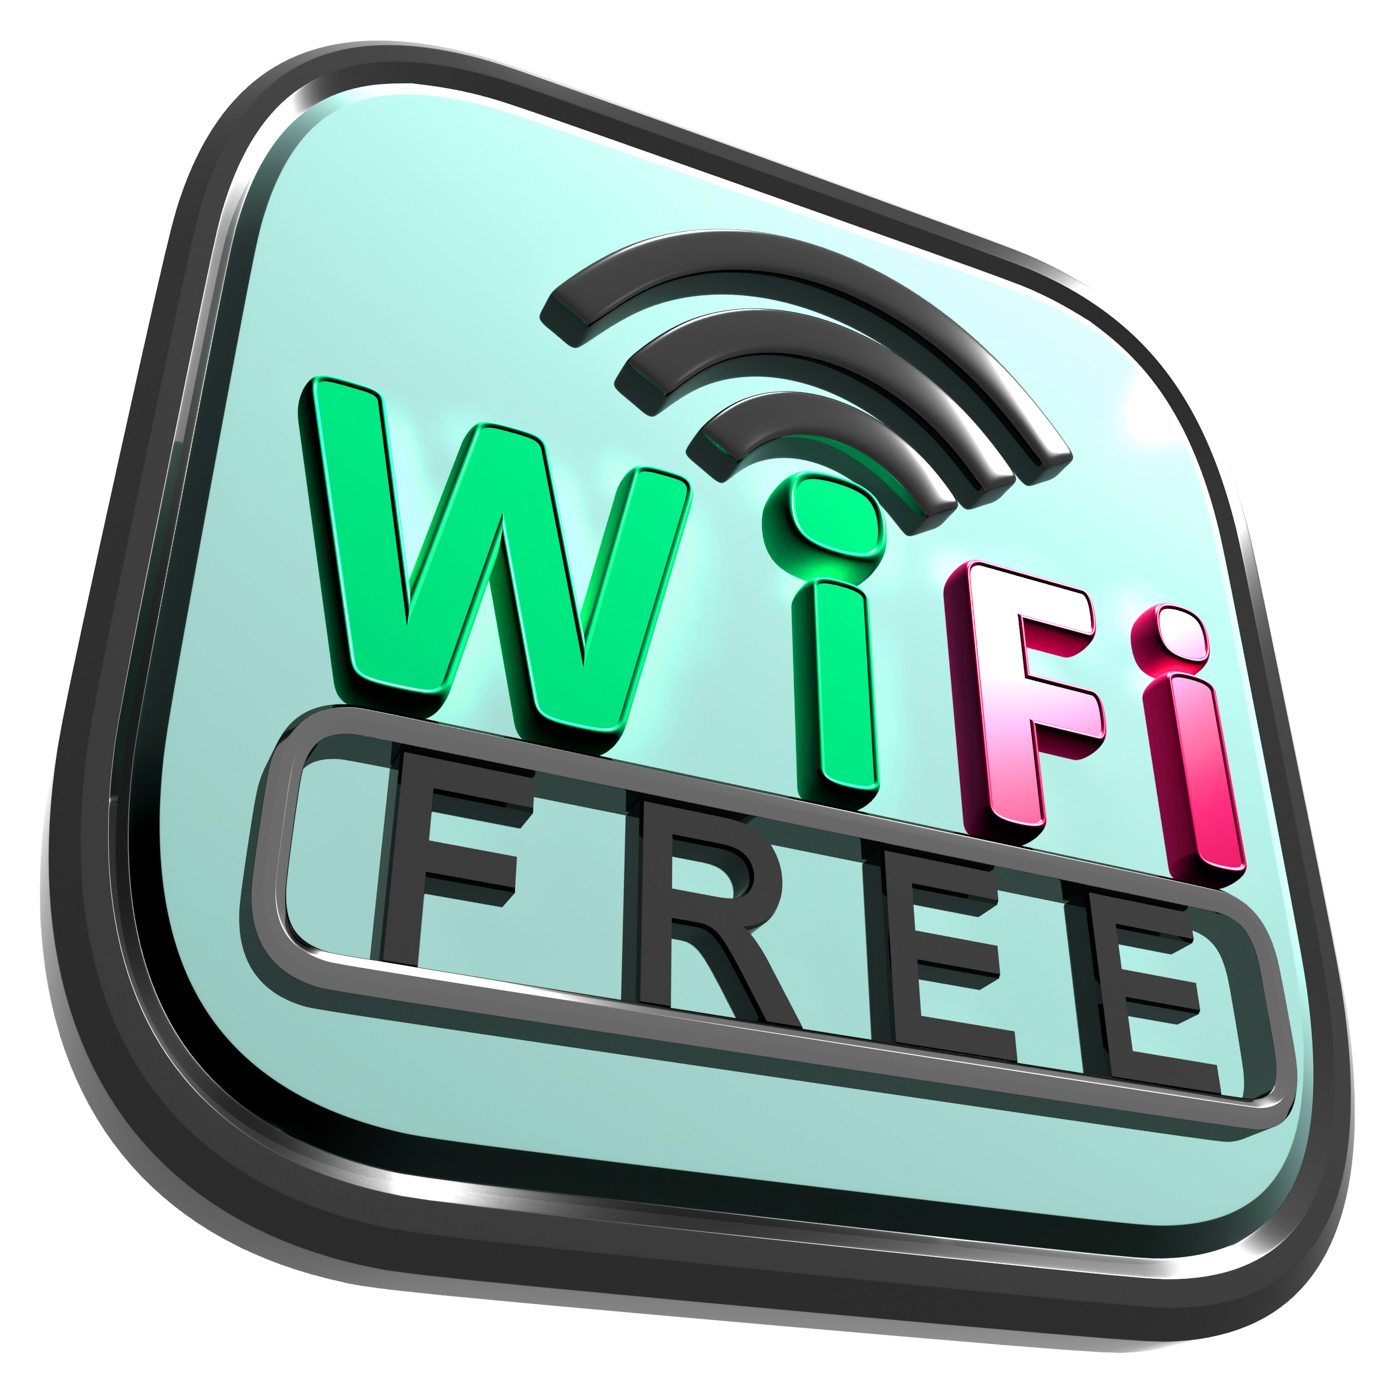 Wifi free internet shows wireless connecting photo